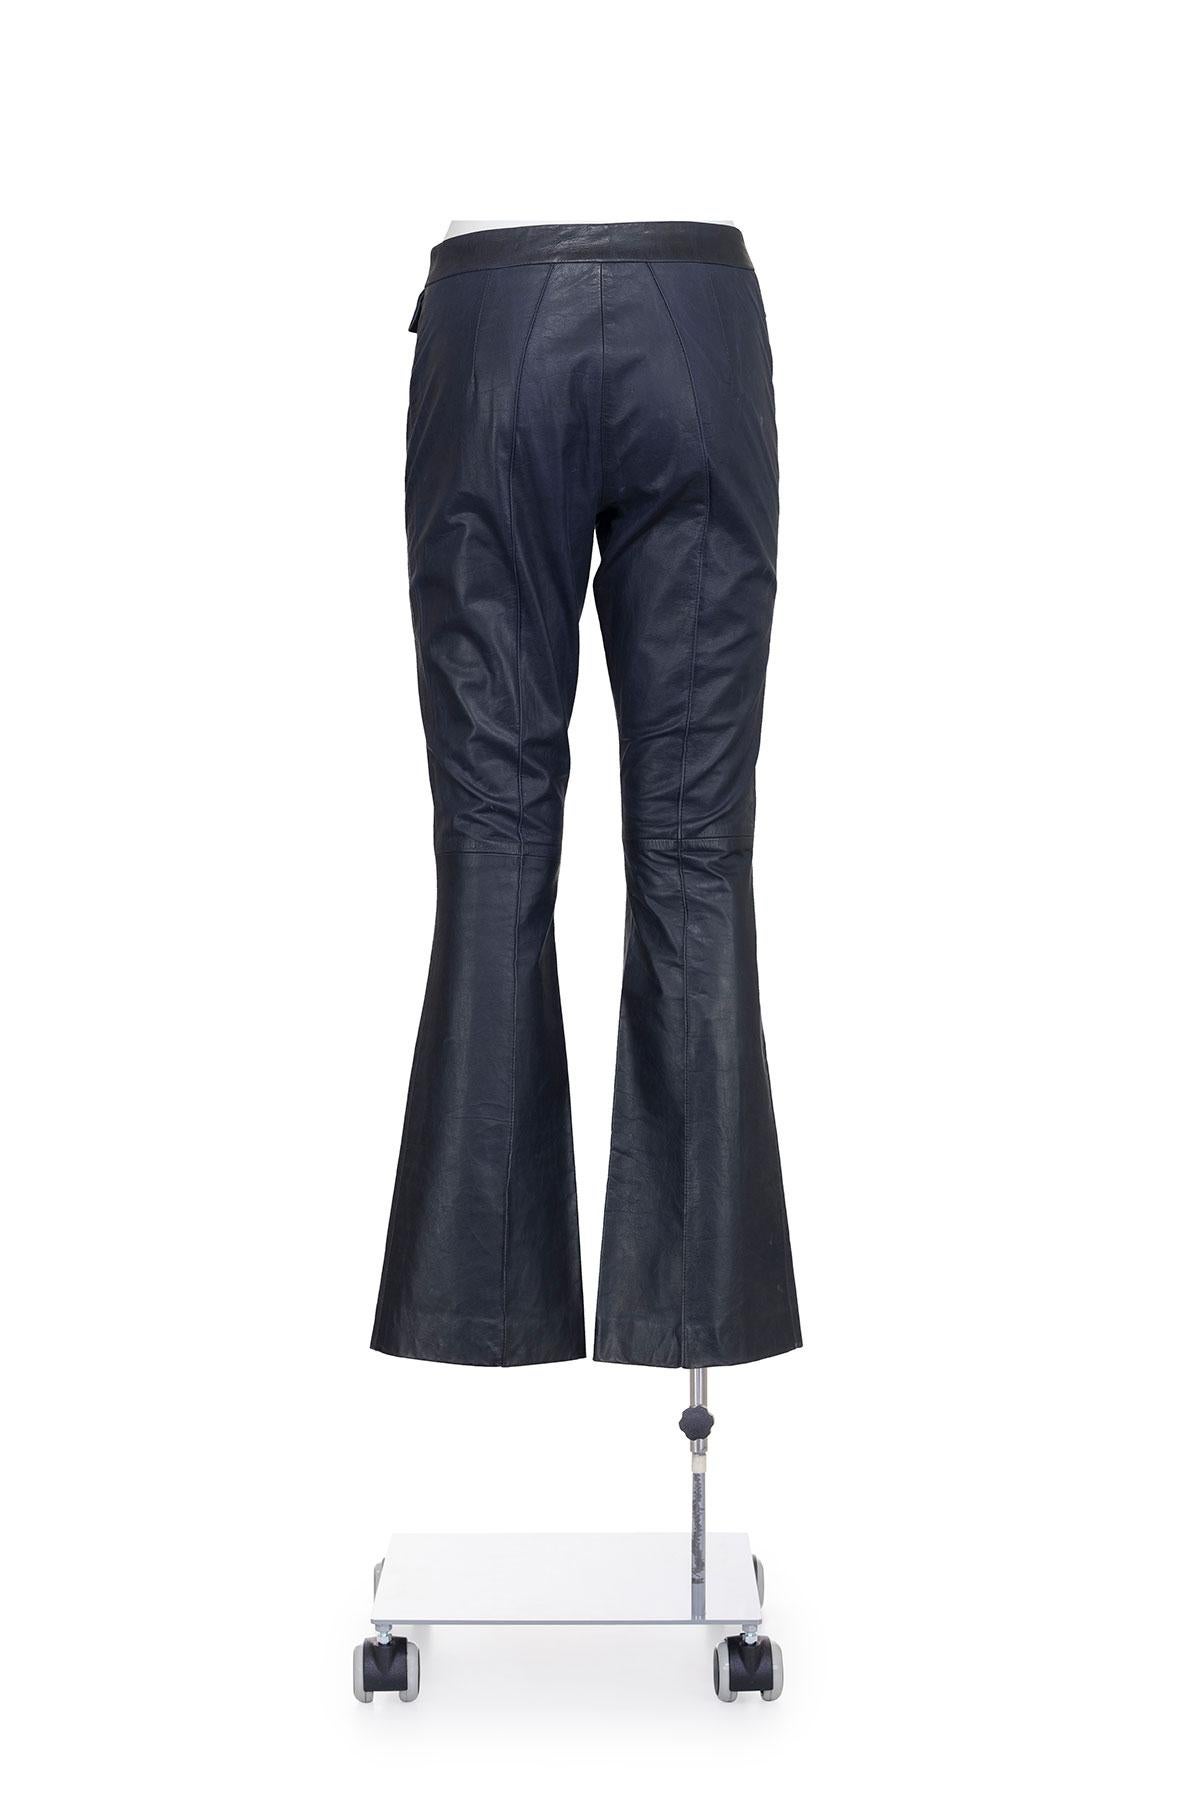 Women's or Men's JOHN GALLIANO SS 1991 Iconic Leather Flared Trousers For Sale